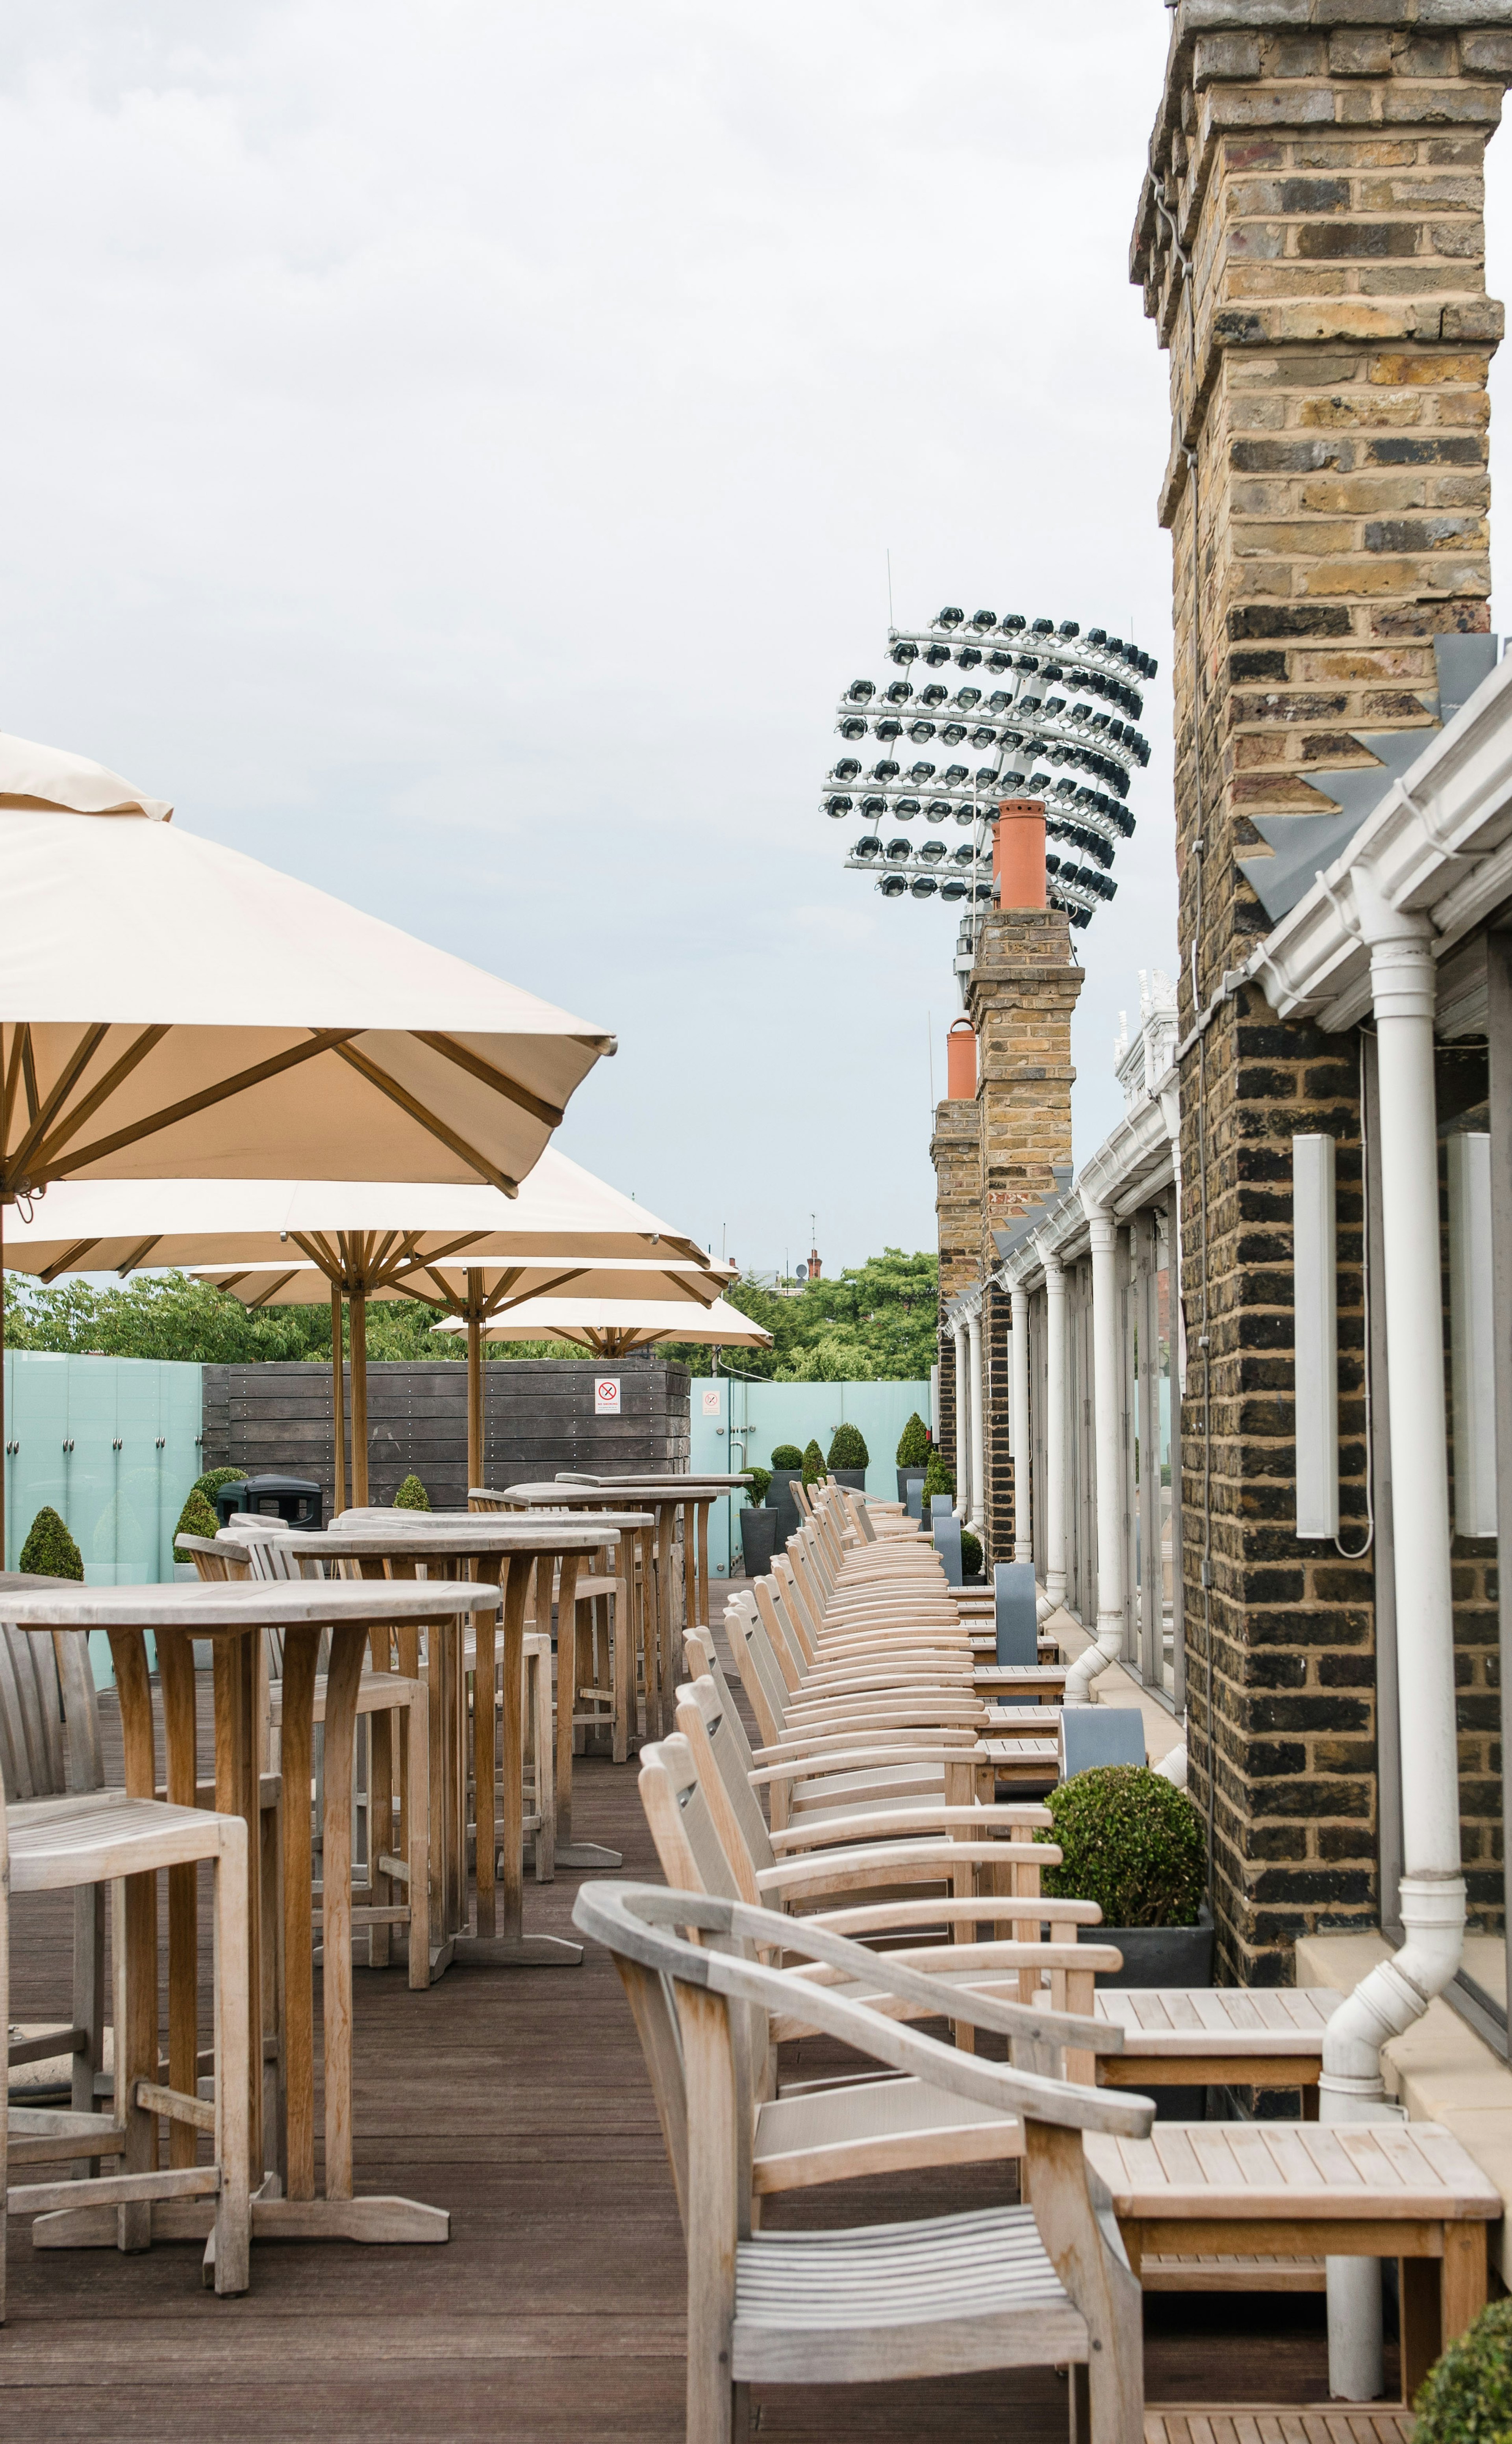 Venues - Lord's Cricket Ground